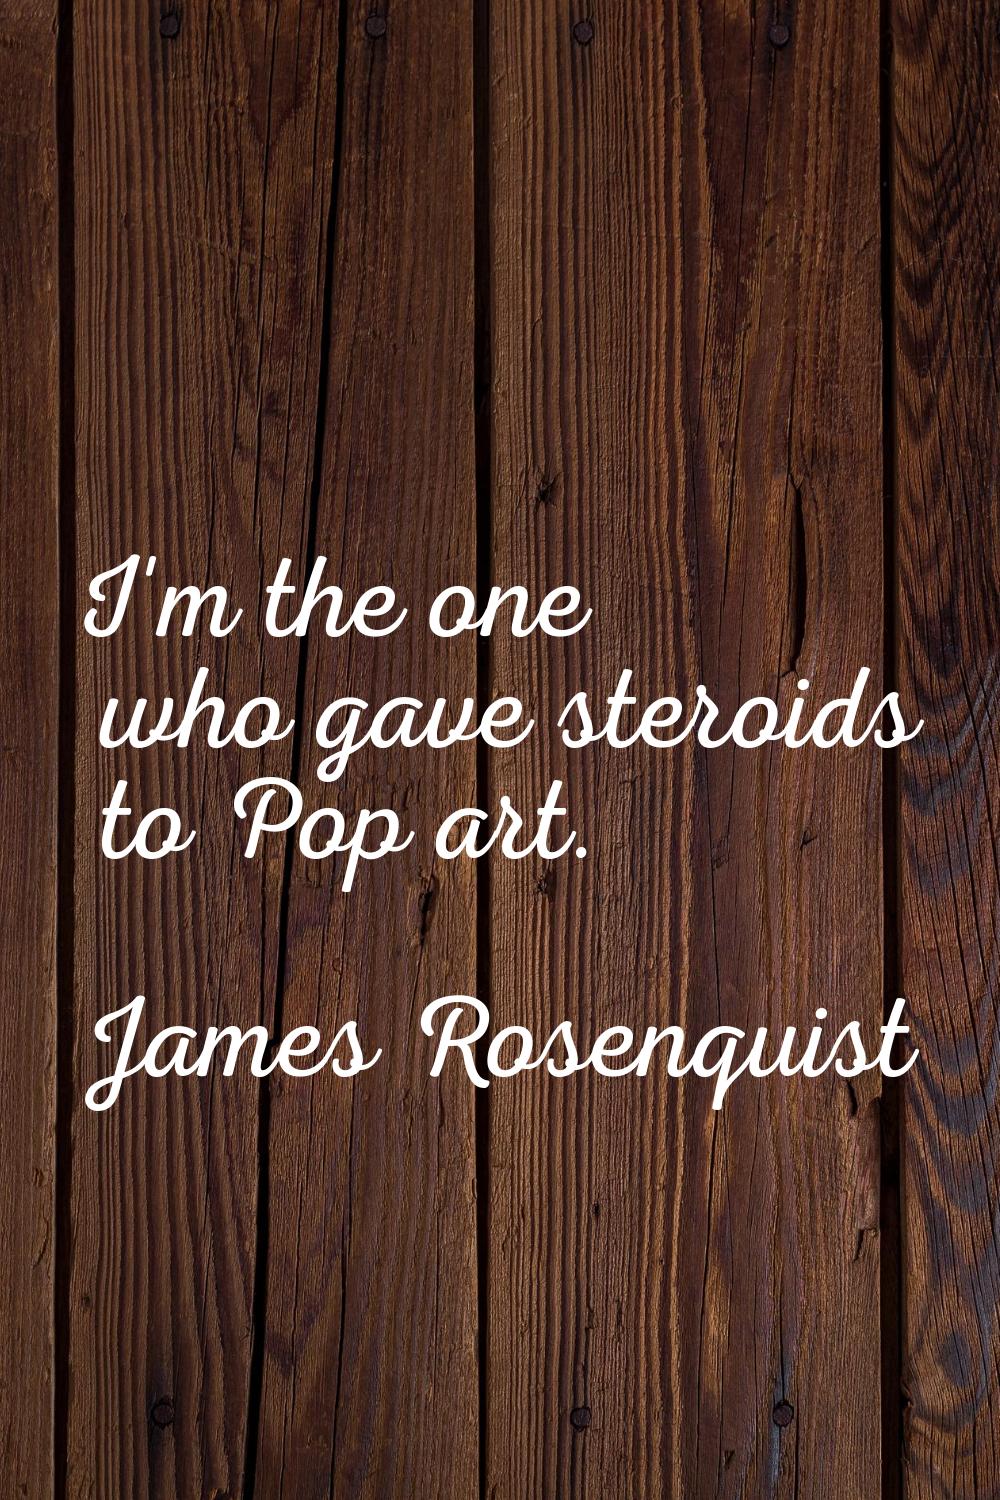 I'm the one who gave steroids to Pop art.